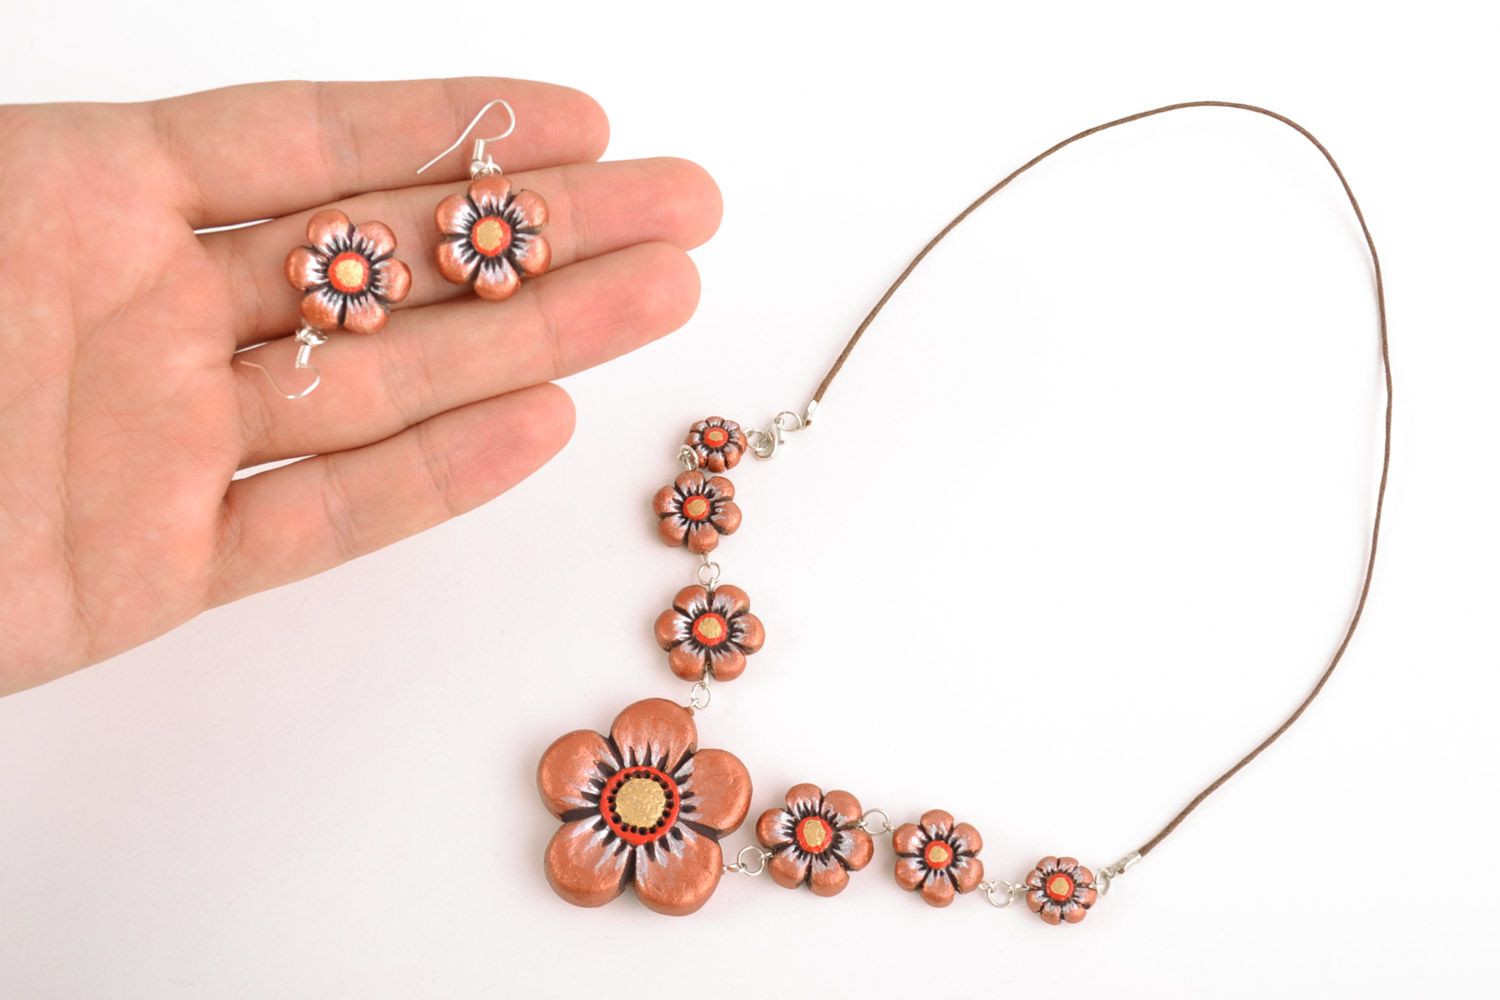 Handmade brown clay jewelry set 2 items flower earrings and necklace photo 2